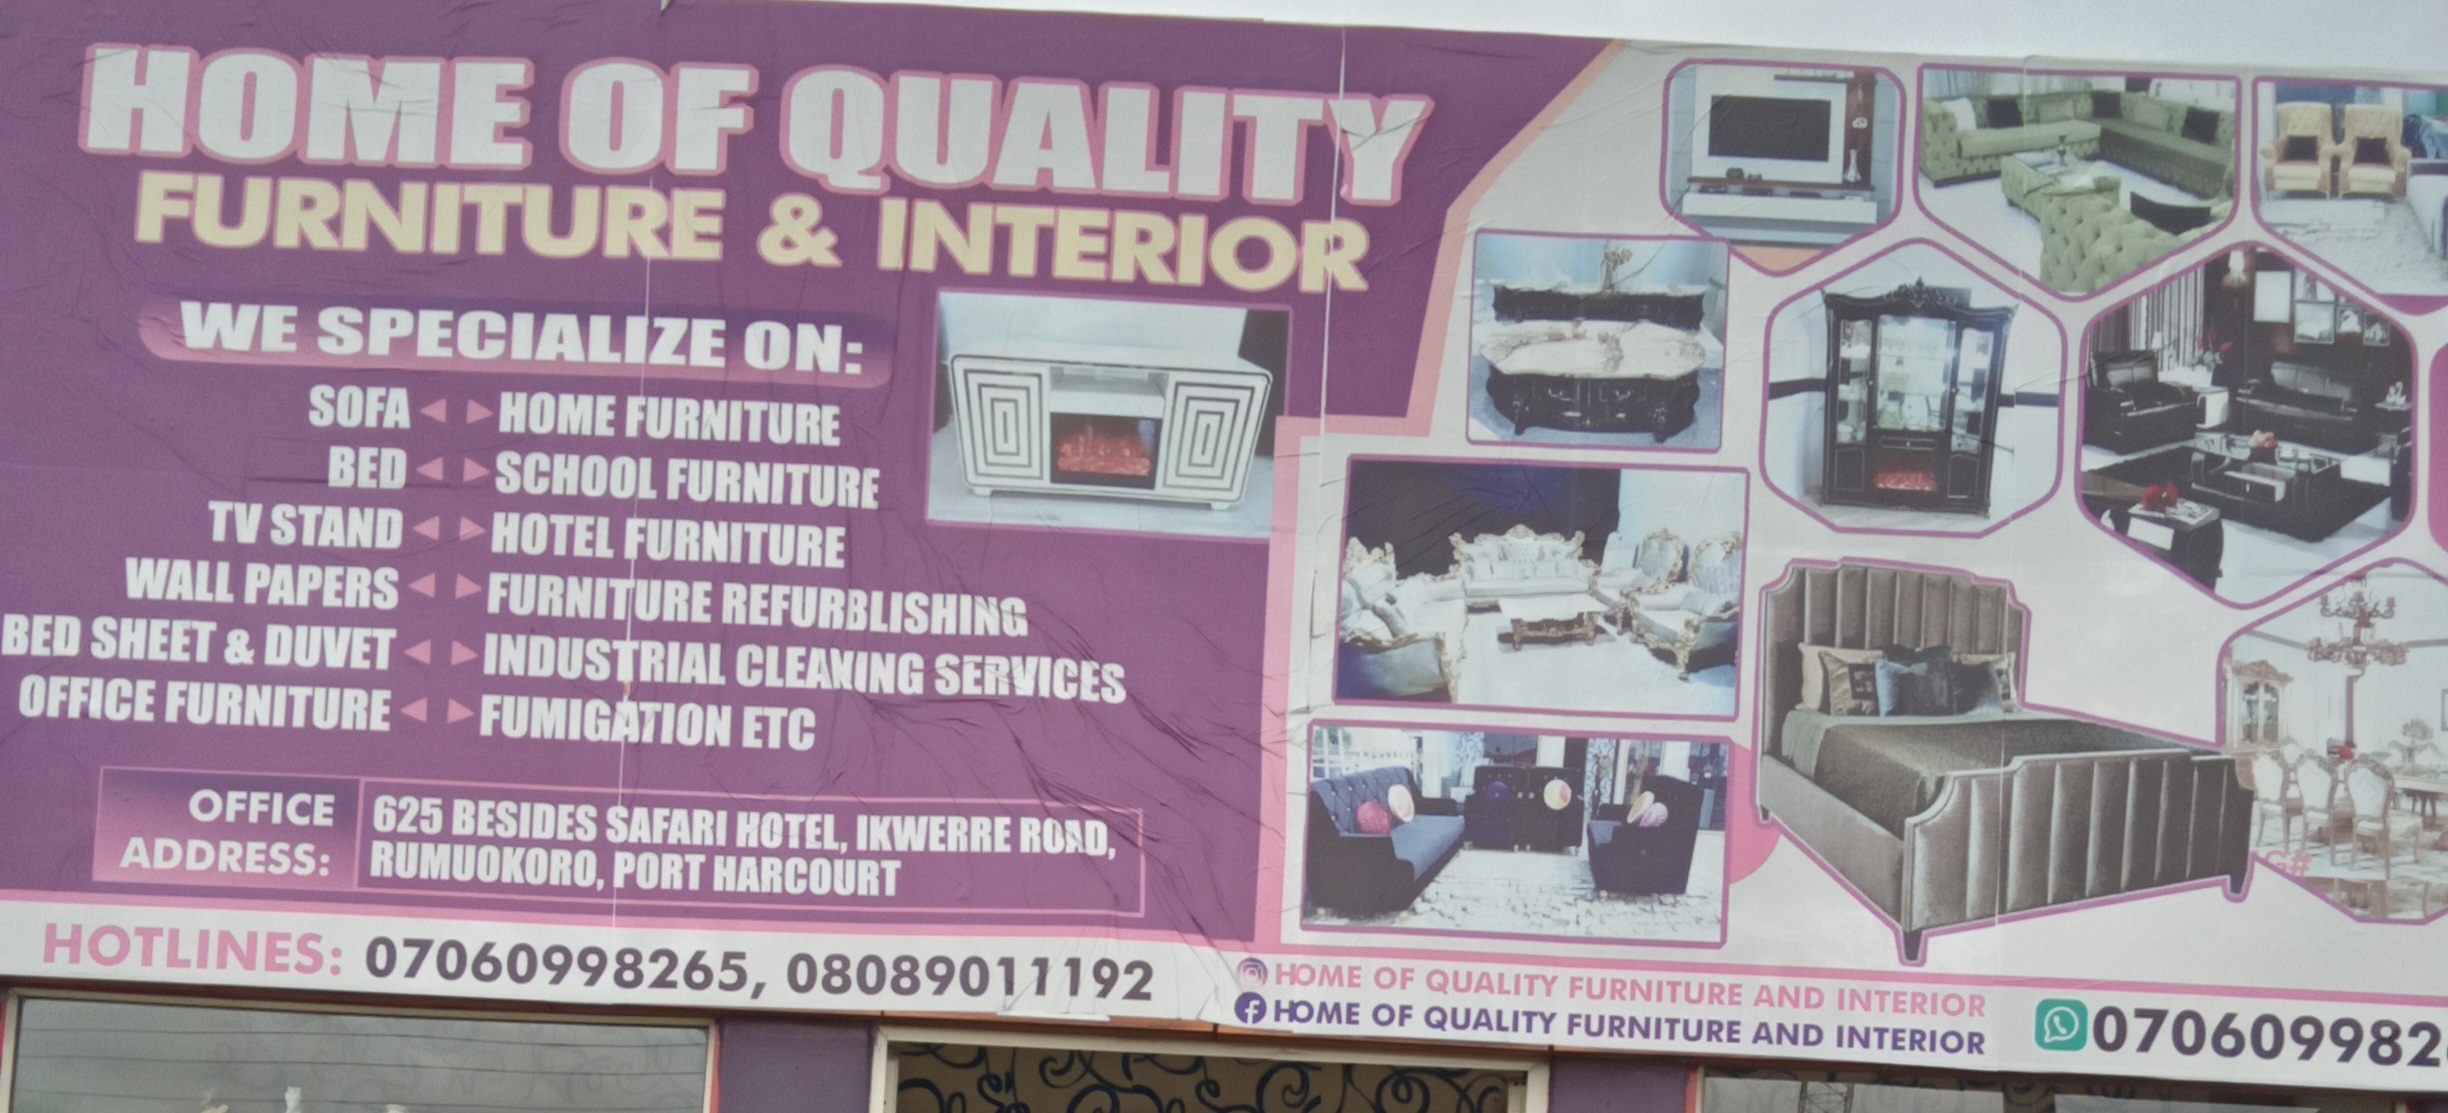 Home of quality furniture  Port Harcourt - Rumuokoro Banner